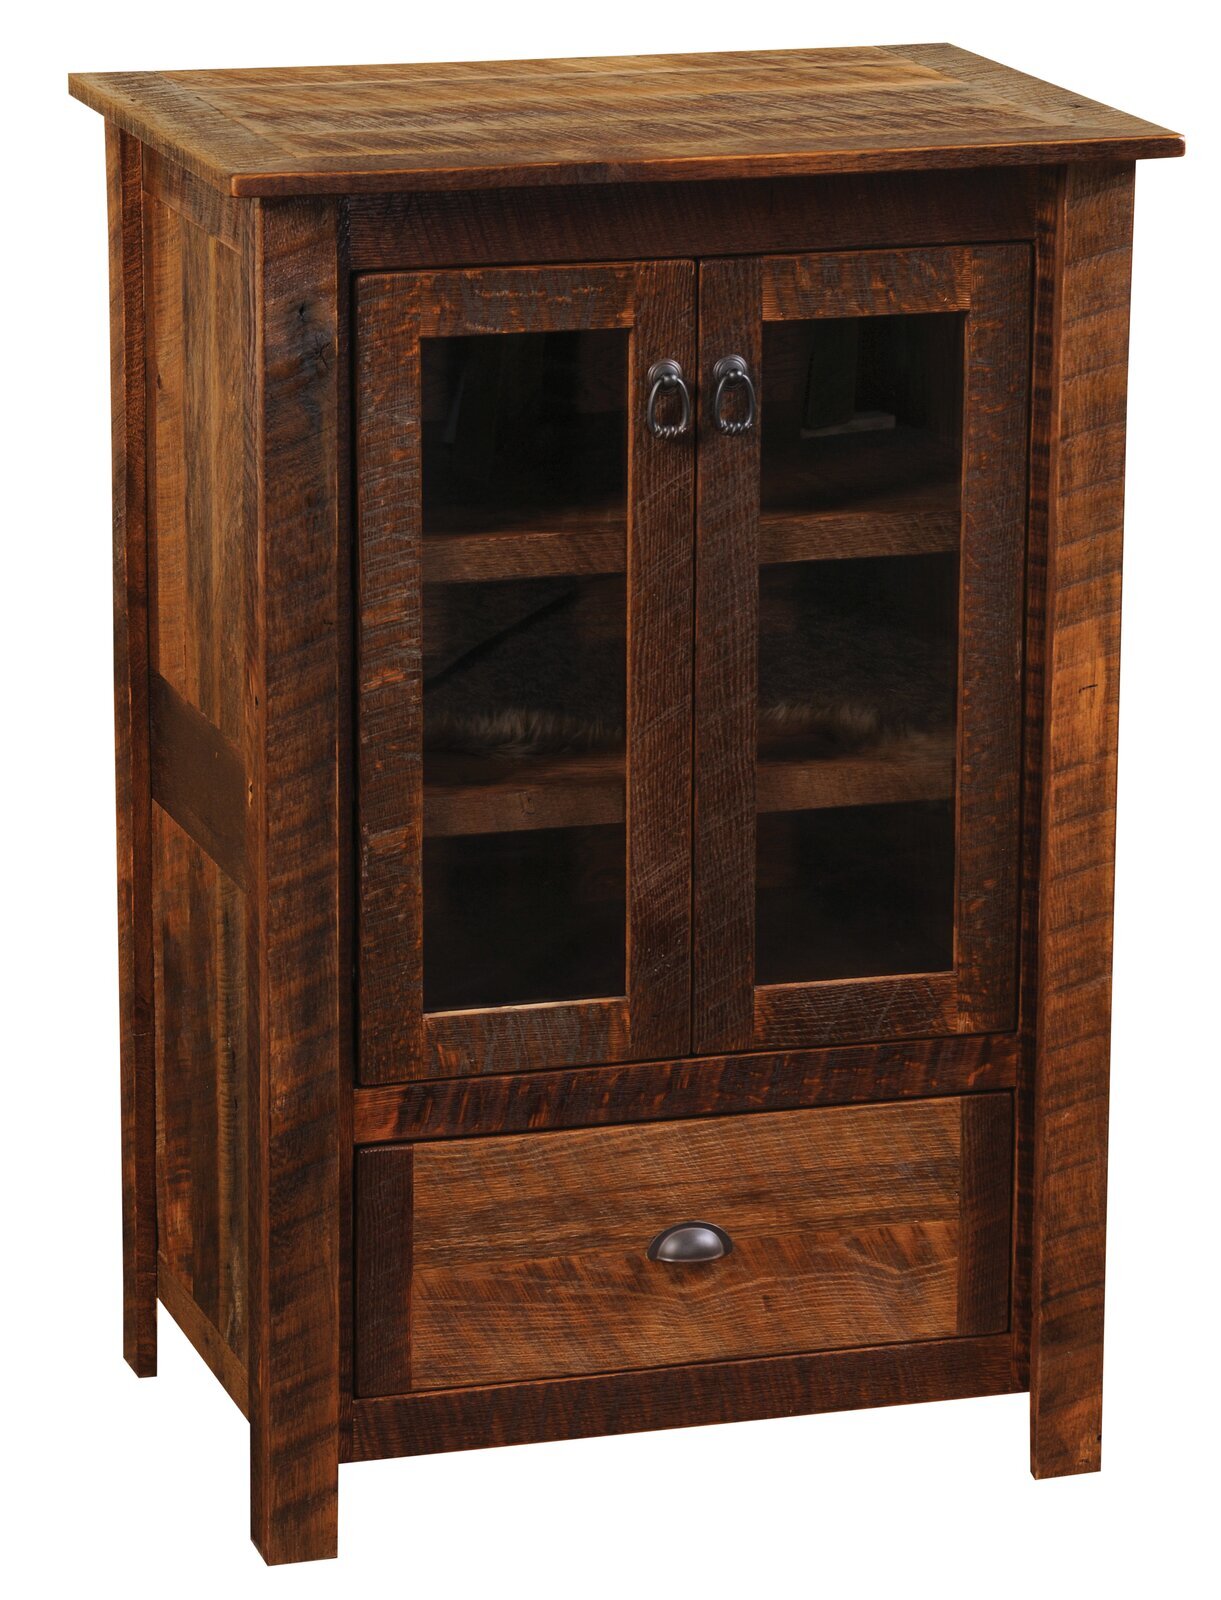 Rustic Wooden CD Storage Cabinet With Drawer